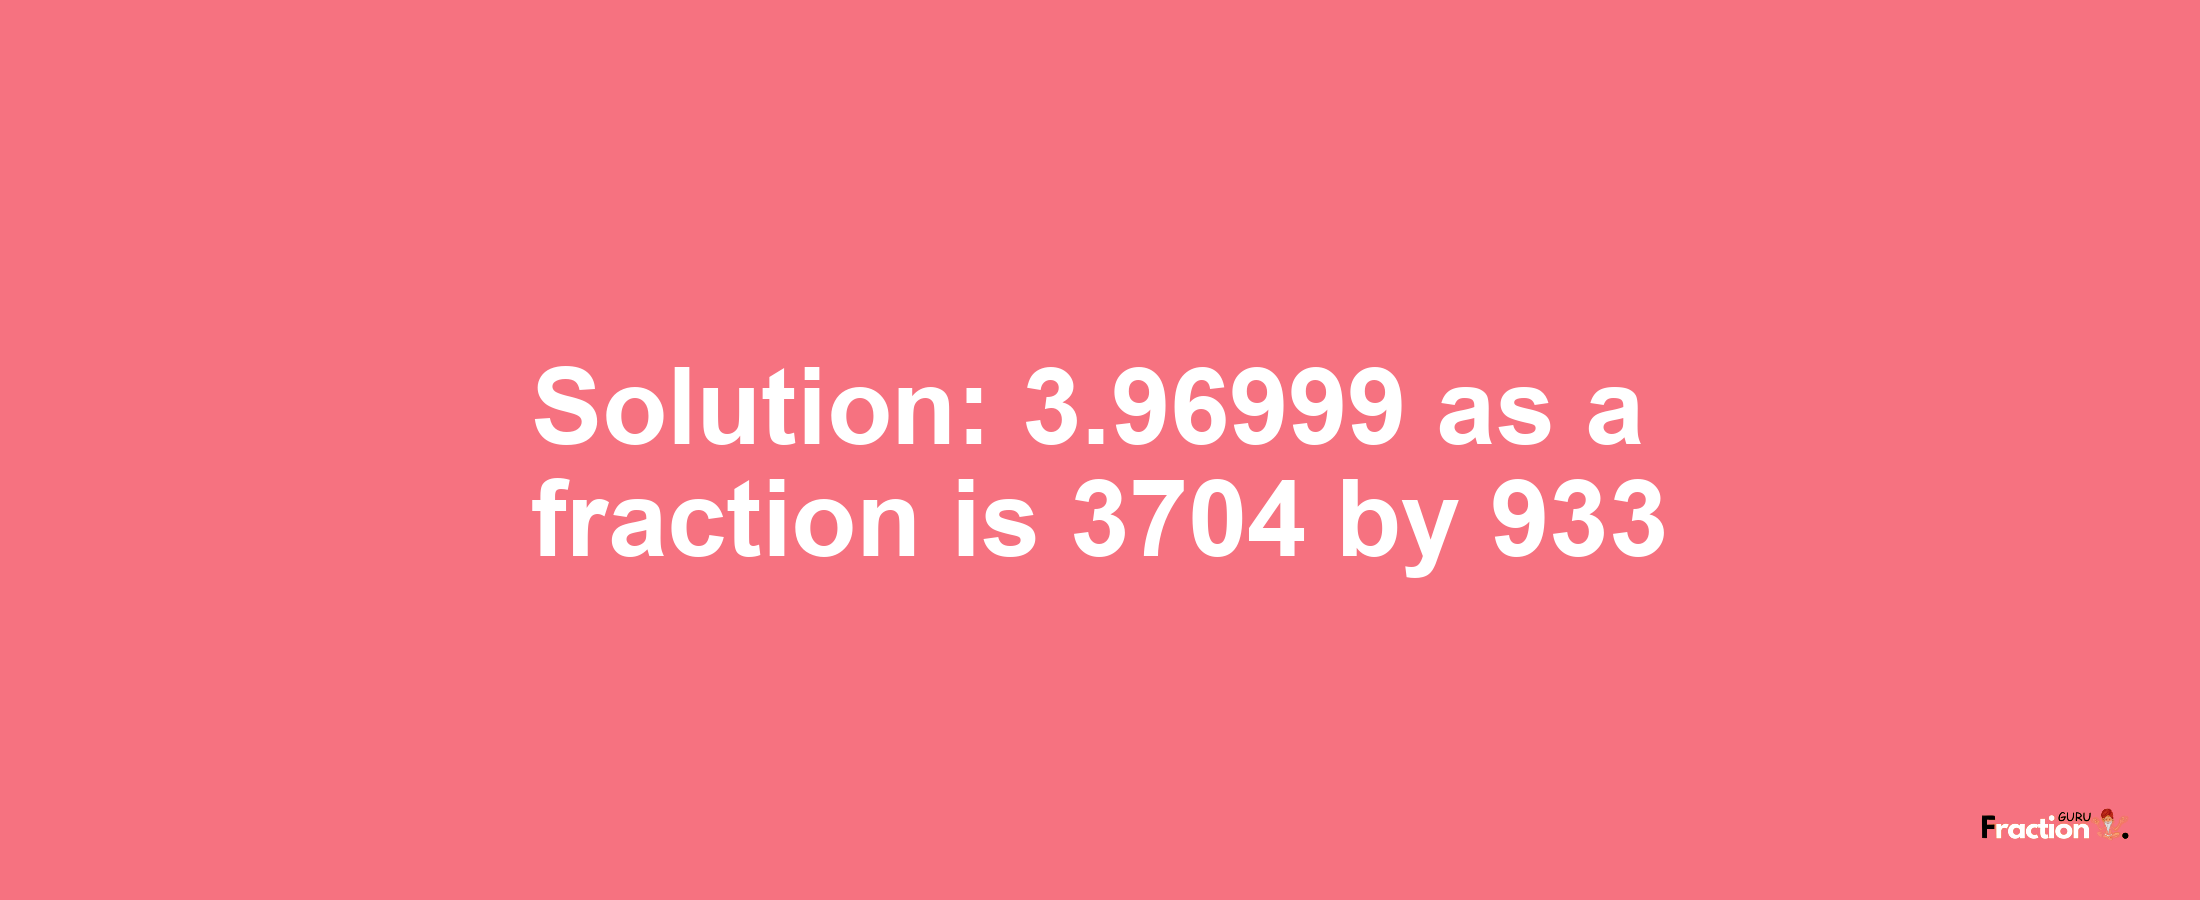 Solution:3.96999 as a fraction is 3704/933